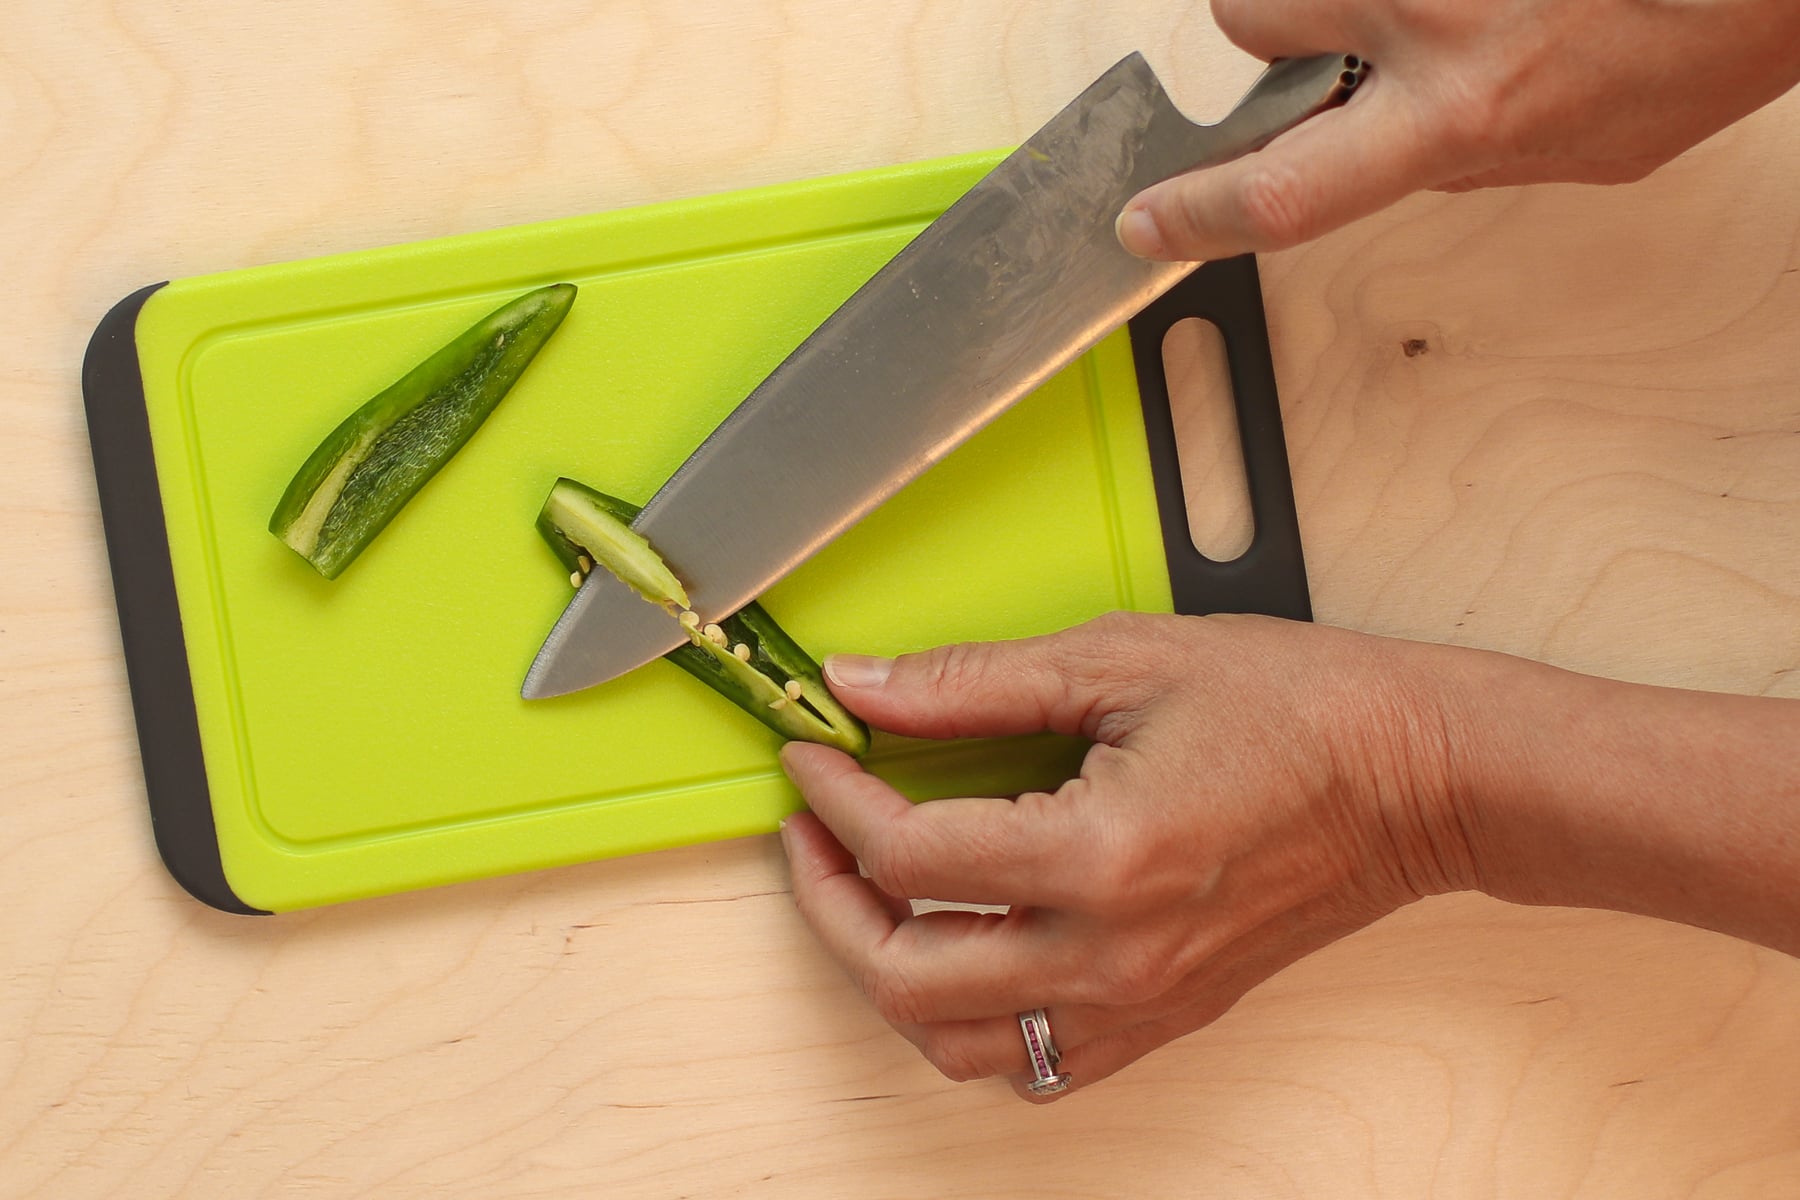 I'm using a chef's knife to cutting a jalepeño on a green cutting board.